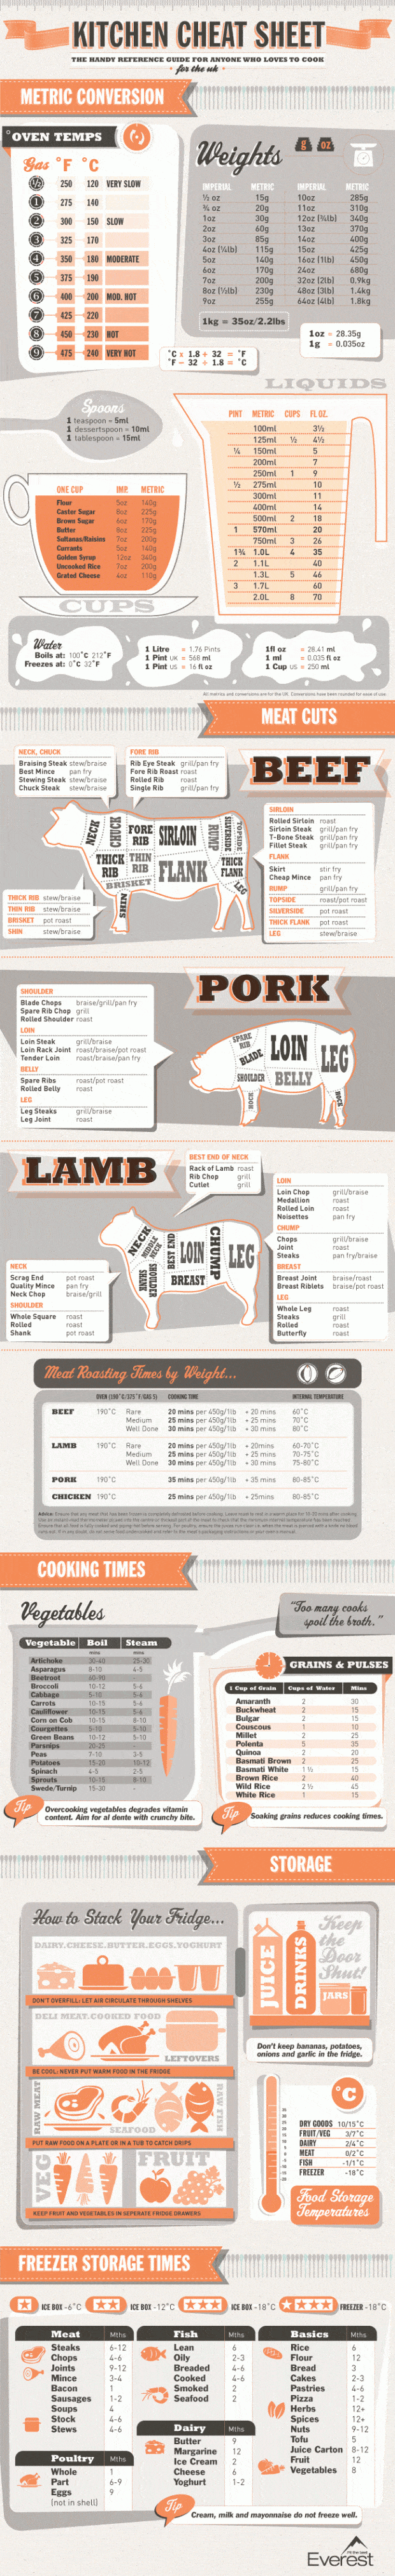 Kitchen cheat sheet with conversion tables, meat cut definitions, fridge organization and general cooking tips